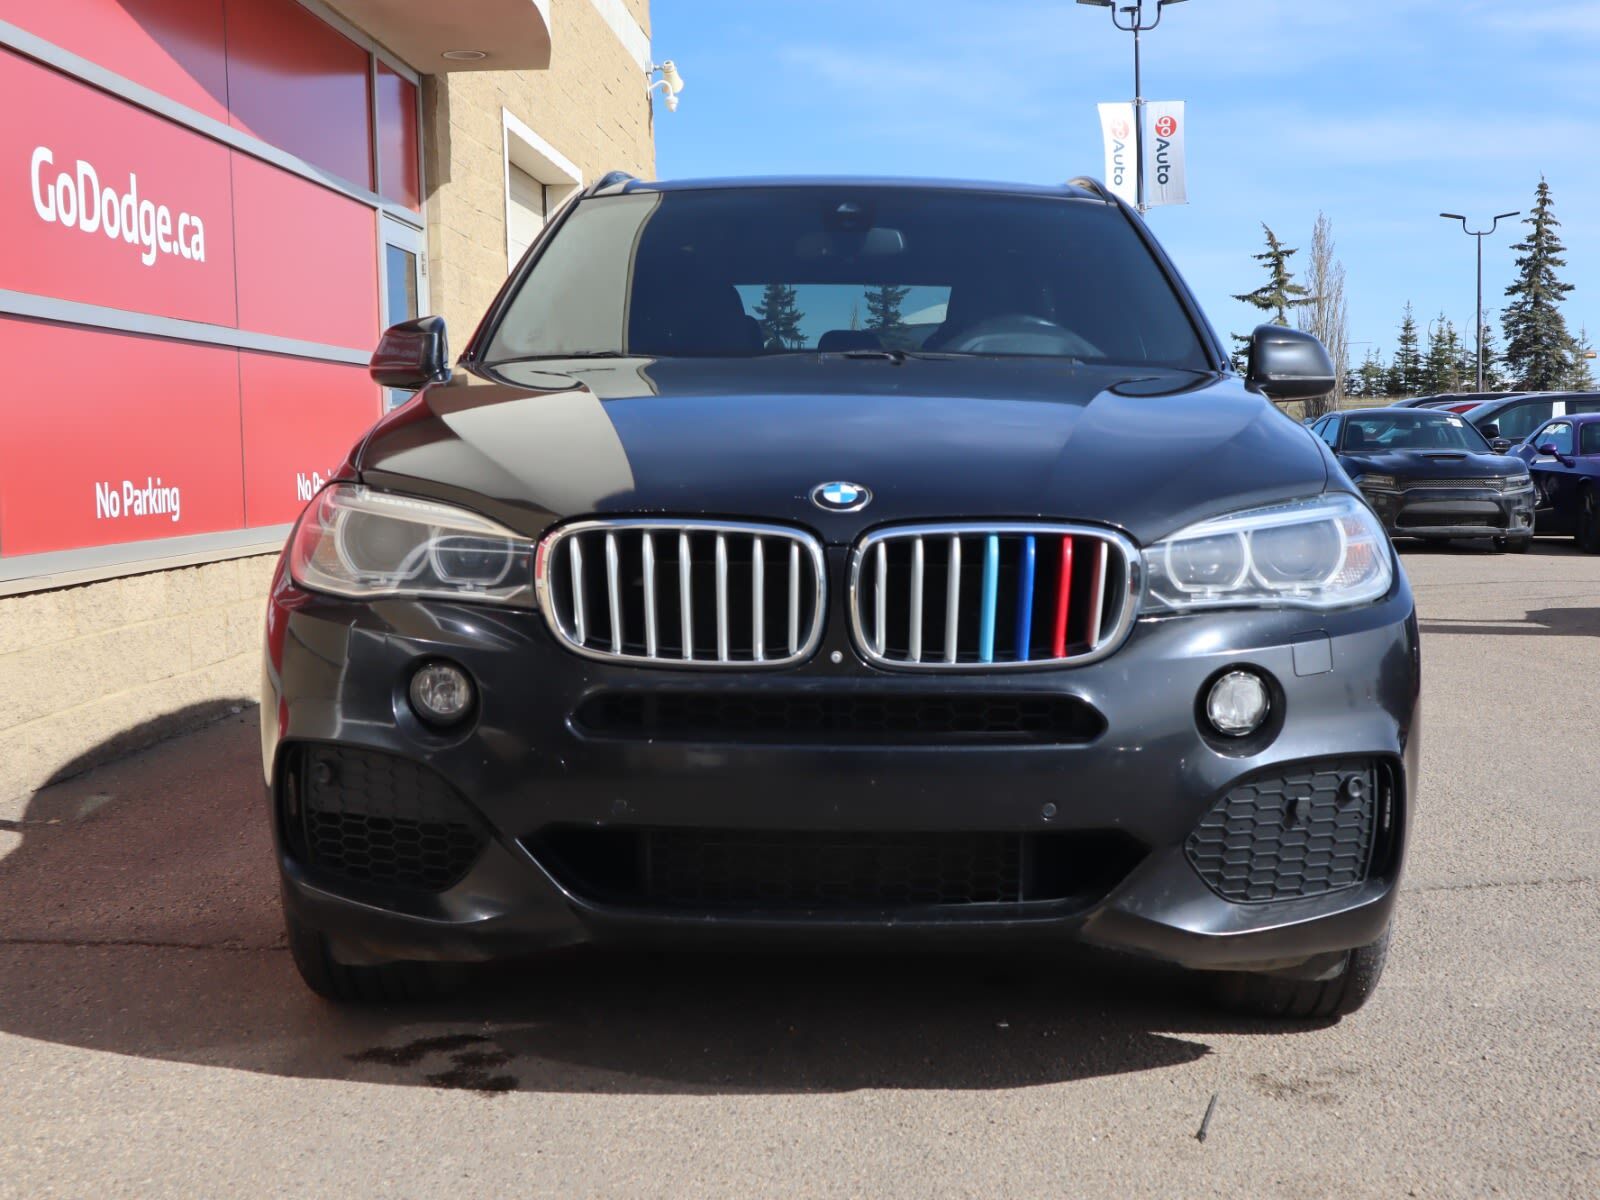 2014 BMW X5 XDRIVE 50I IN BLACK EQUIPPED WITH A 445HP TWIN TUR